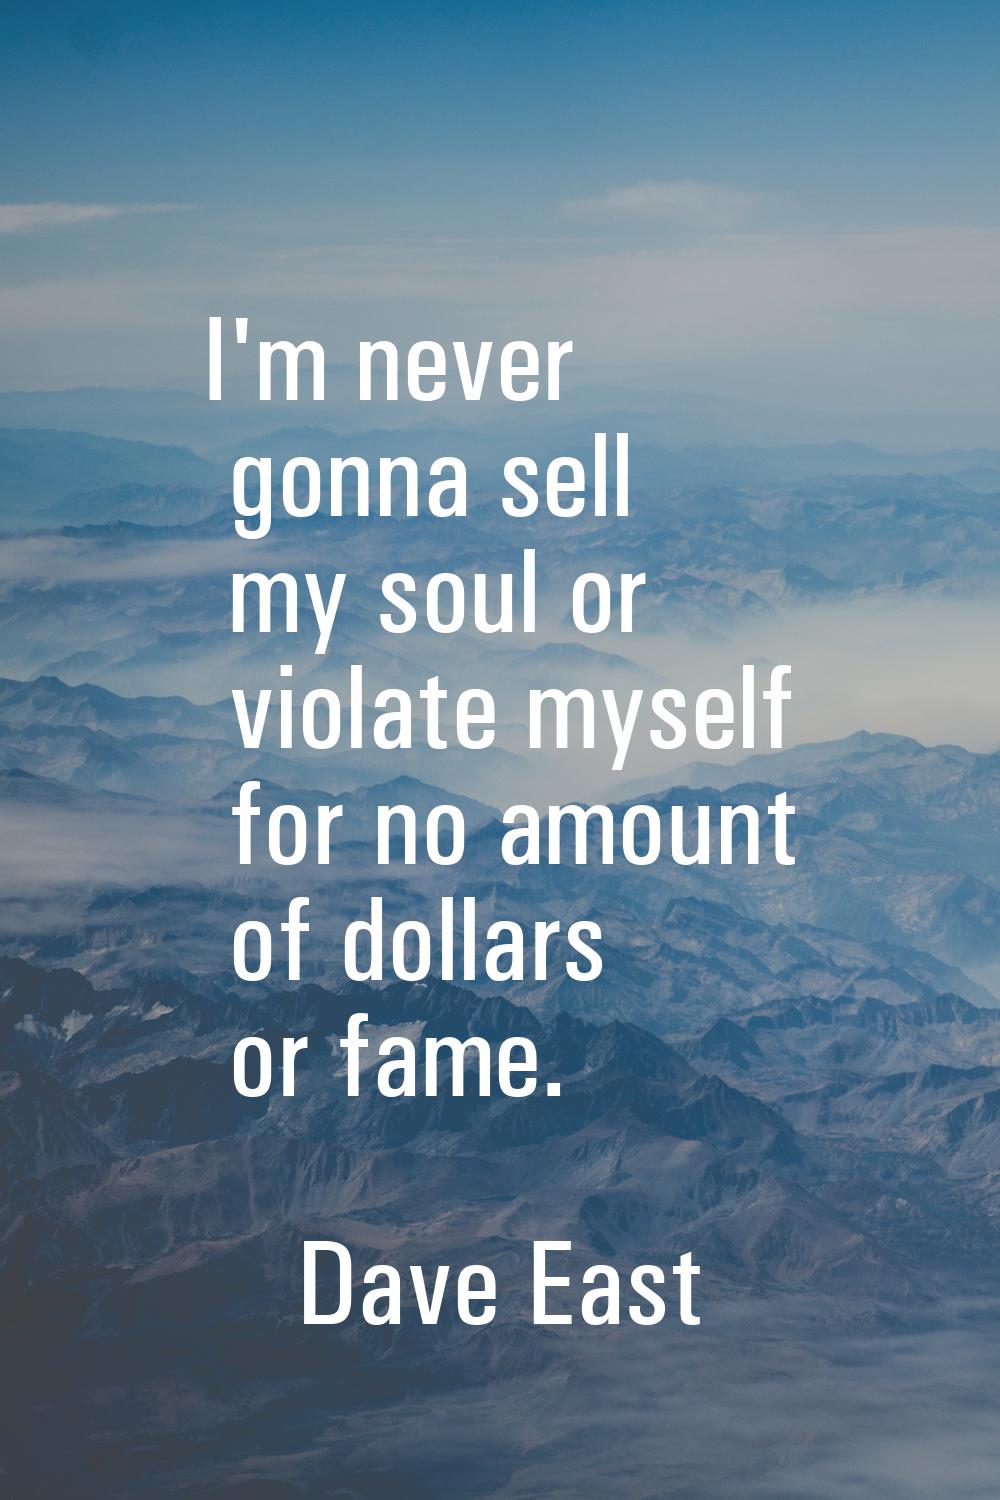 I'm never gonna sell my soul or violate myself for no amount of dollars or fame.